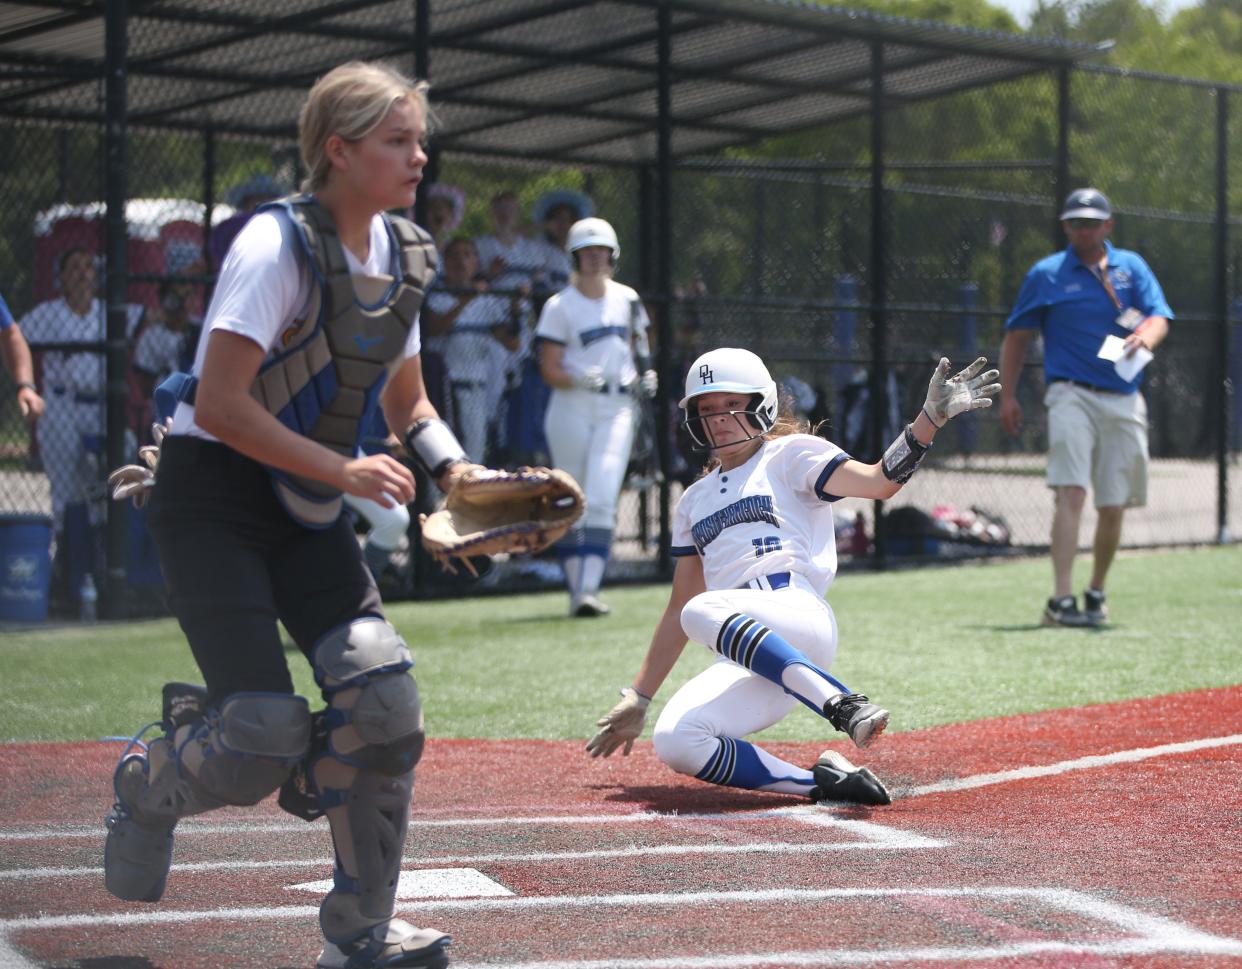 Deposit-Hancock's Kaitlyn Macumber slides into home plate as Friendship-Scio's Morghyn Ross covers the plate during the Class D New York State Softball Championship on June 10, 2023.